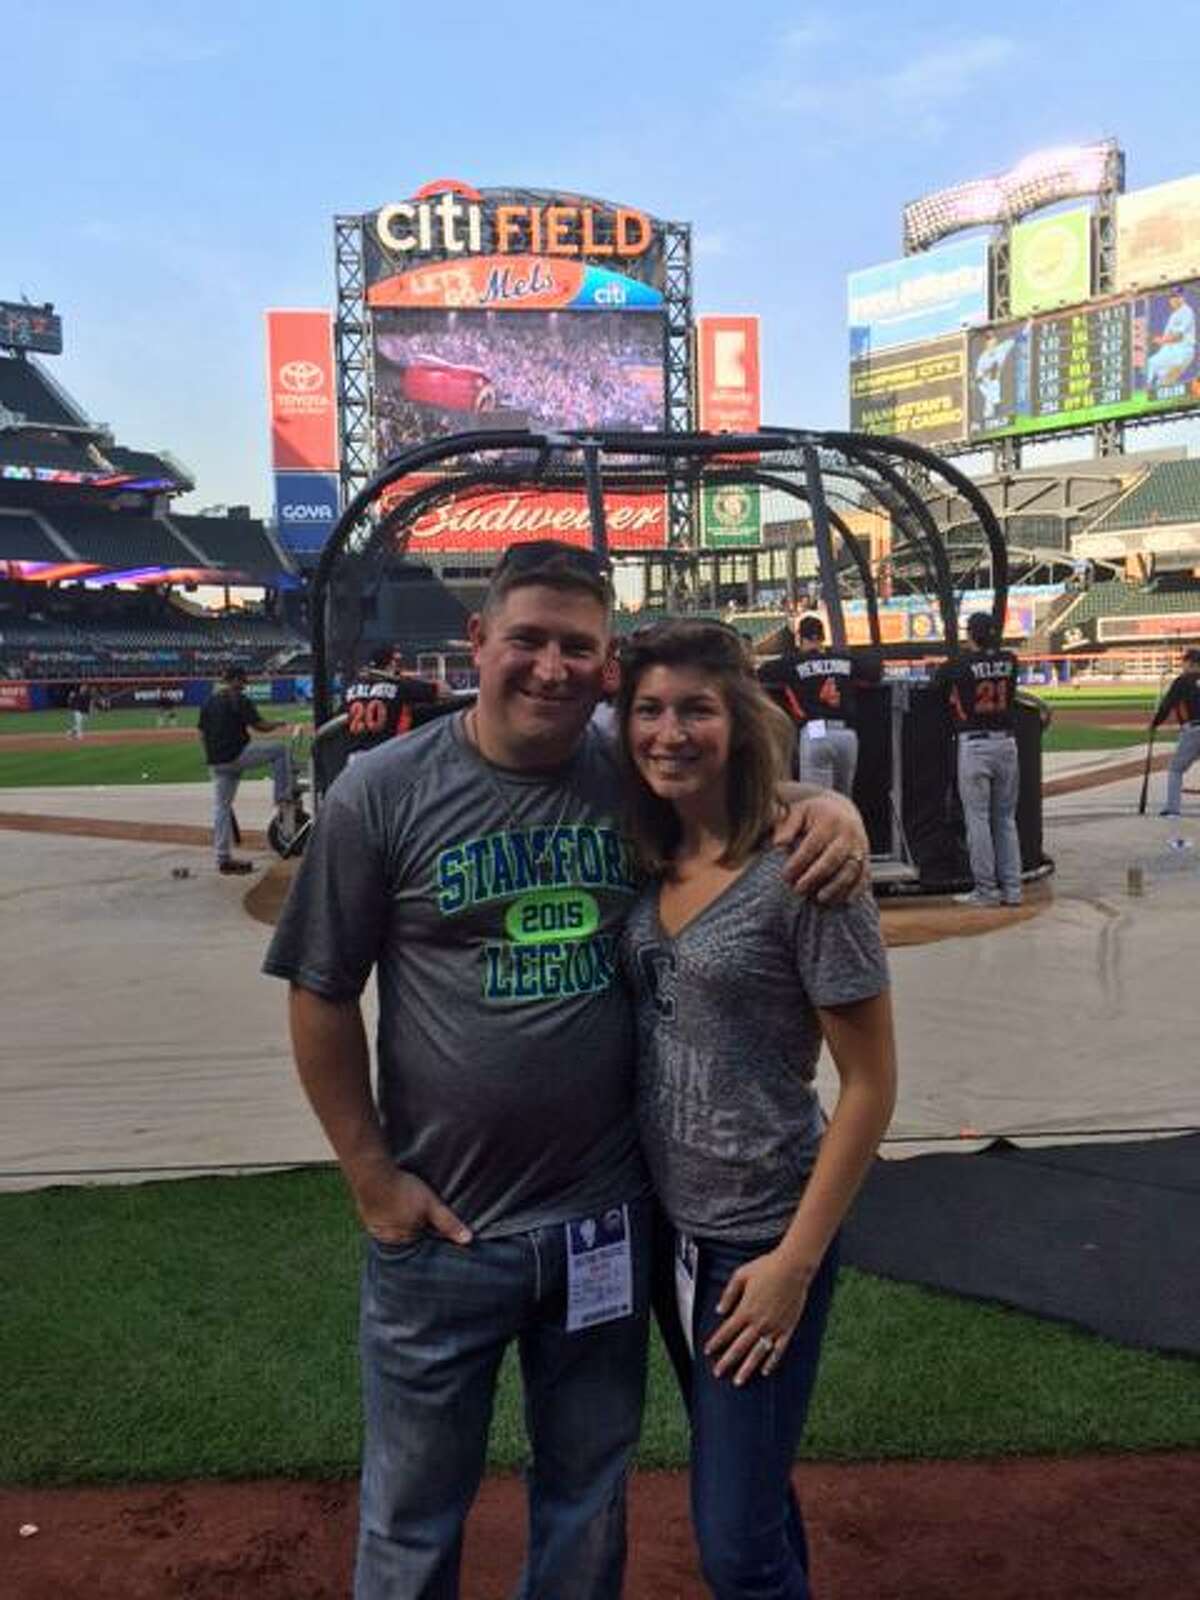 Stamford American Legion's Chris Sabia with his wife Emma at Citi Field in September the day before he began cancer treatments. September 2015.